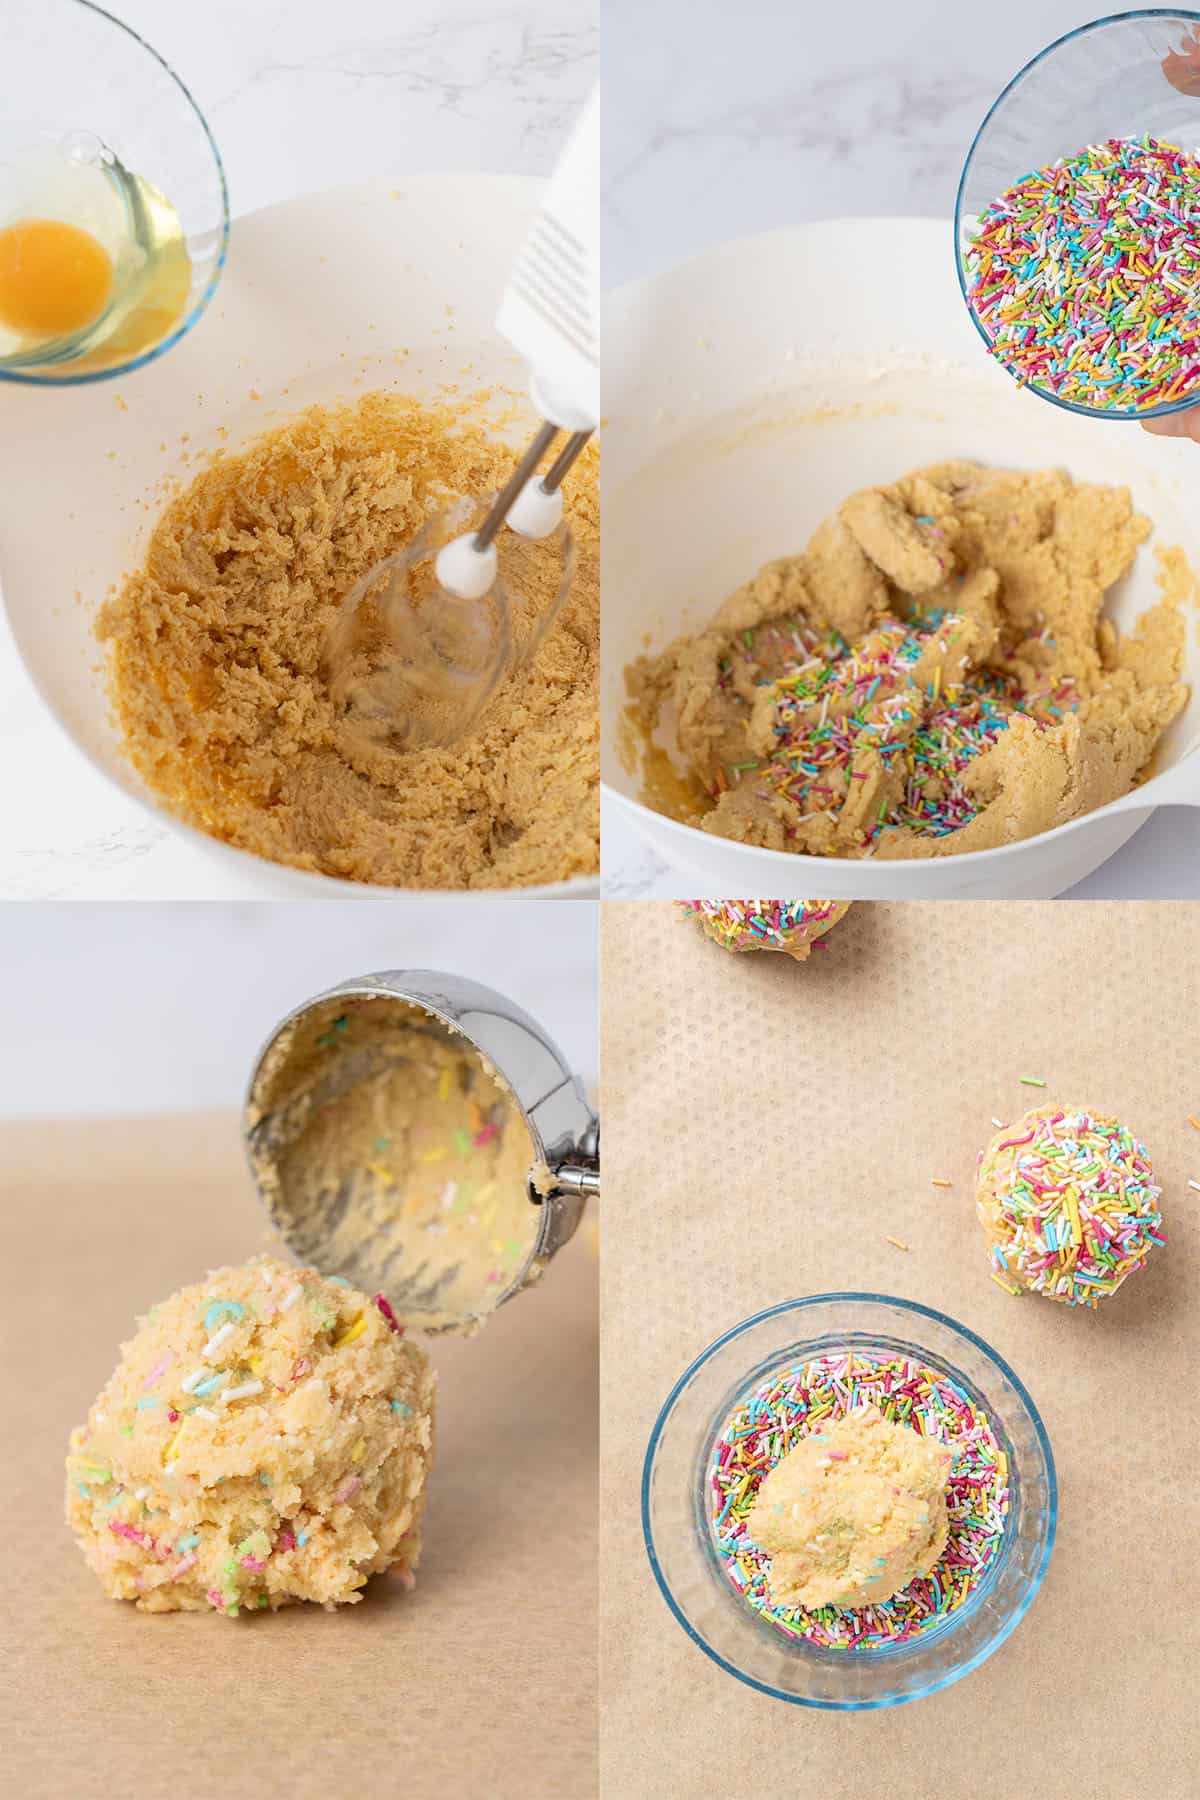 Step-by-step cookie assembly process.